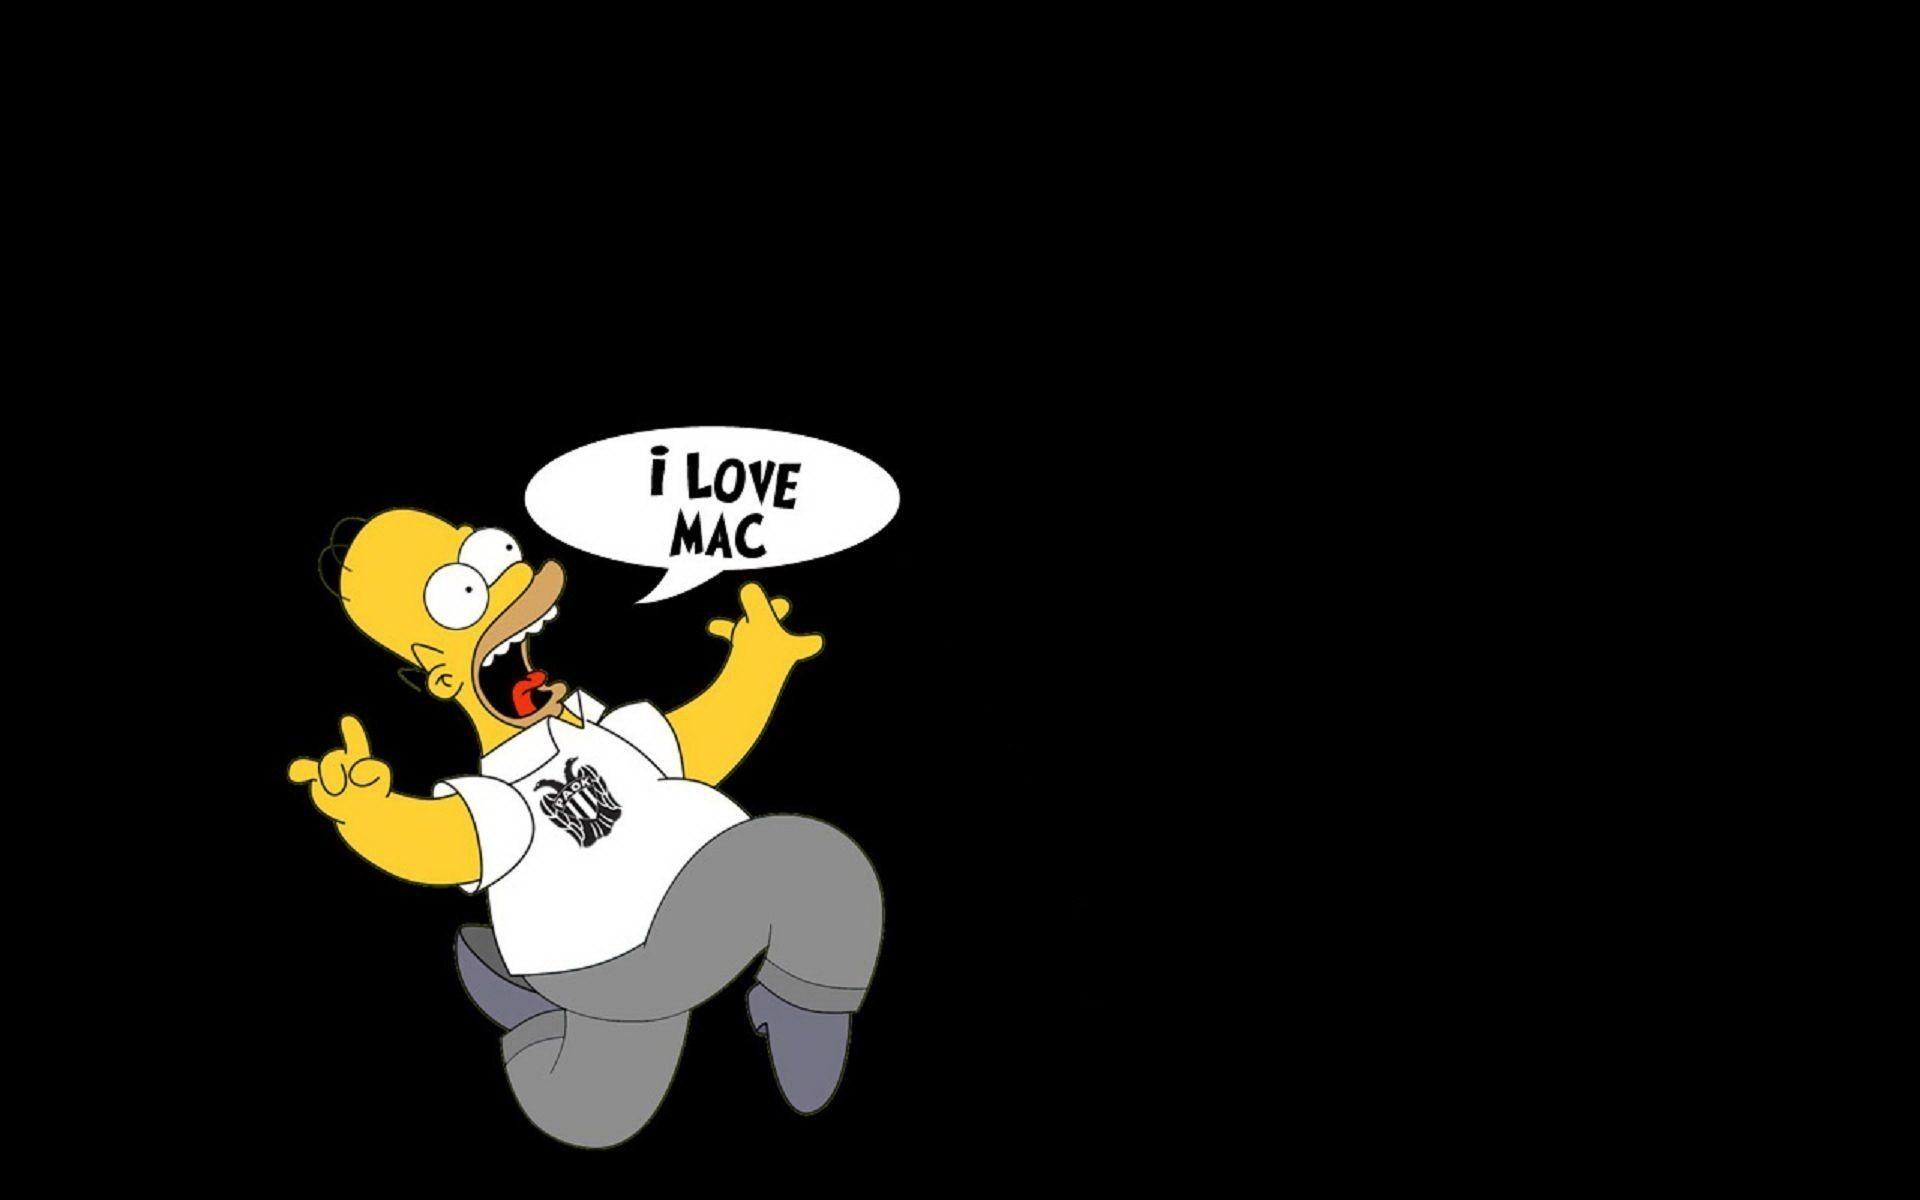 A Picture Of Black Bart Simpson 1920x1080